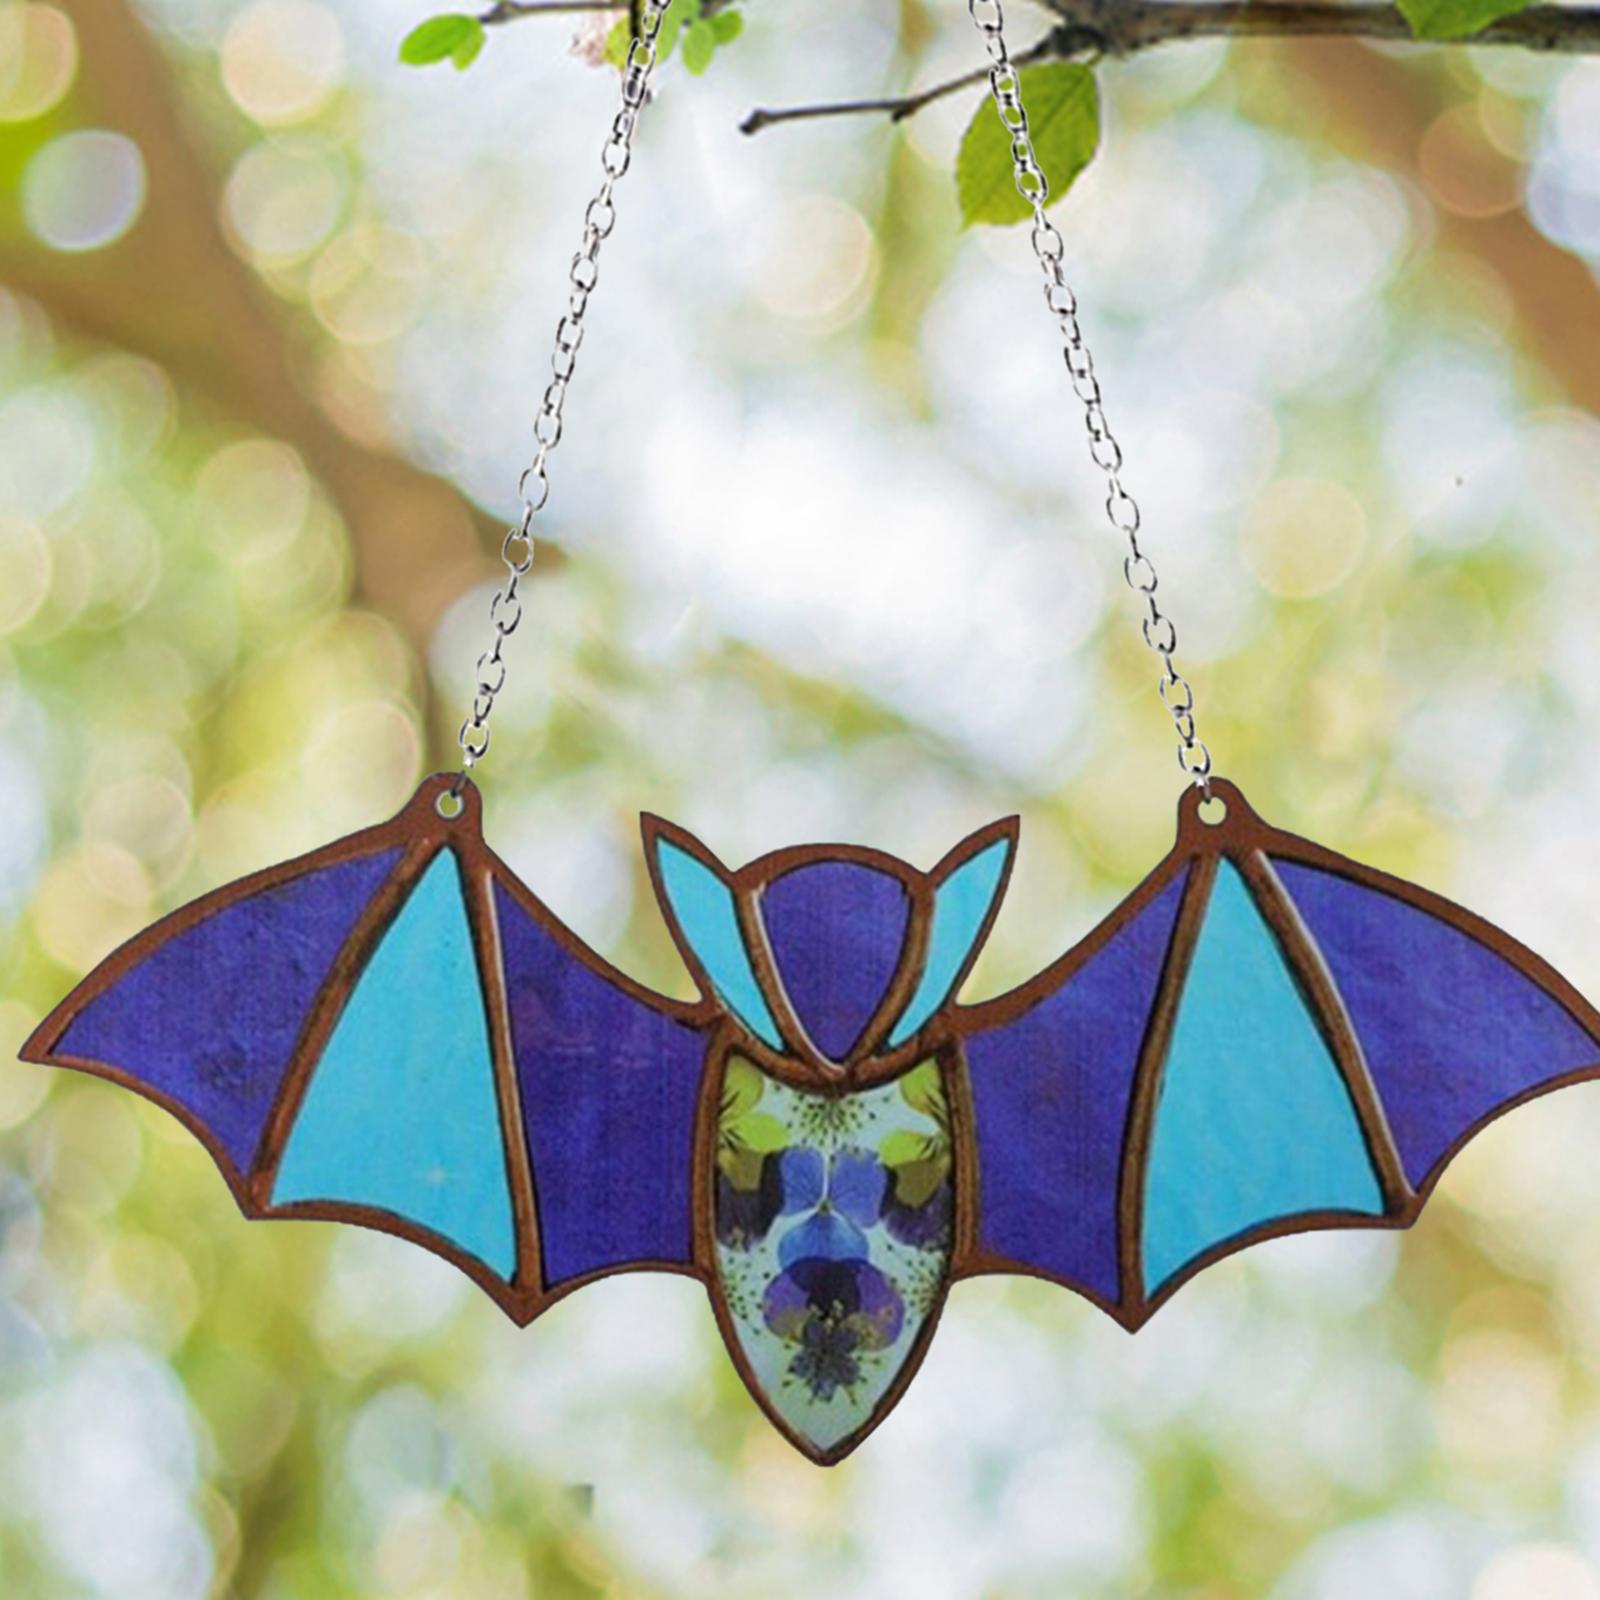 Hanging Bat Decoration Bat Stained Glass Window Hanging for Yard Bar Bedroom Style E